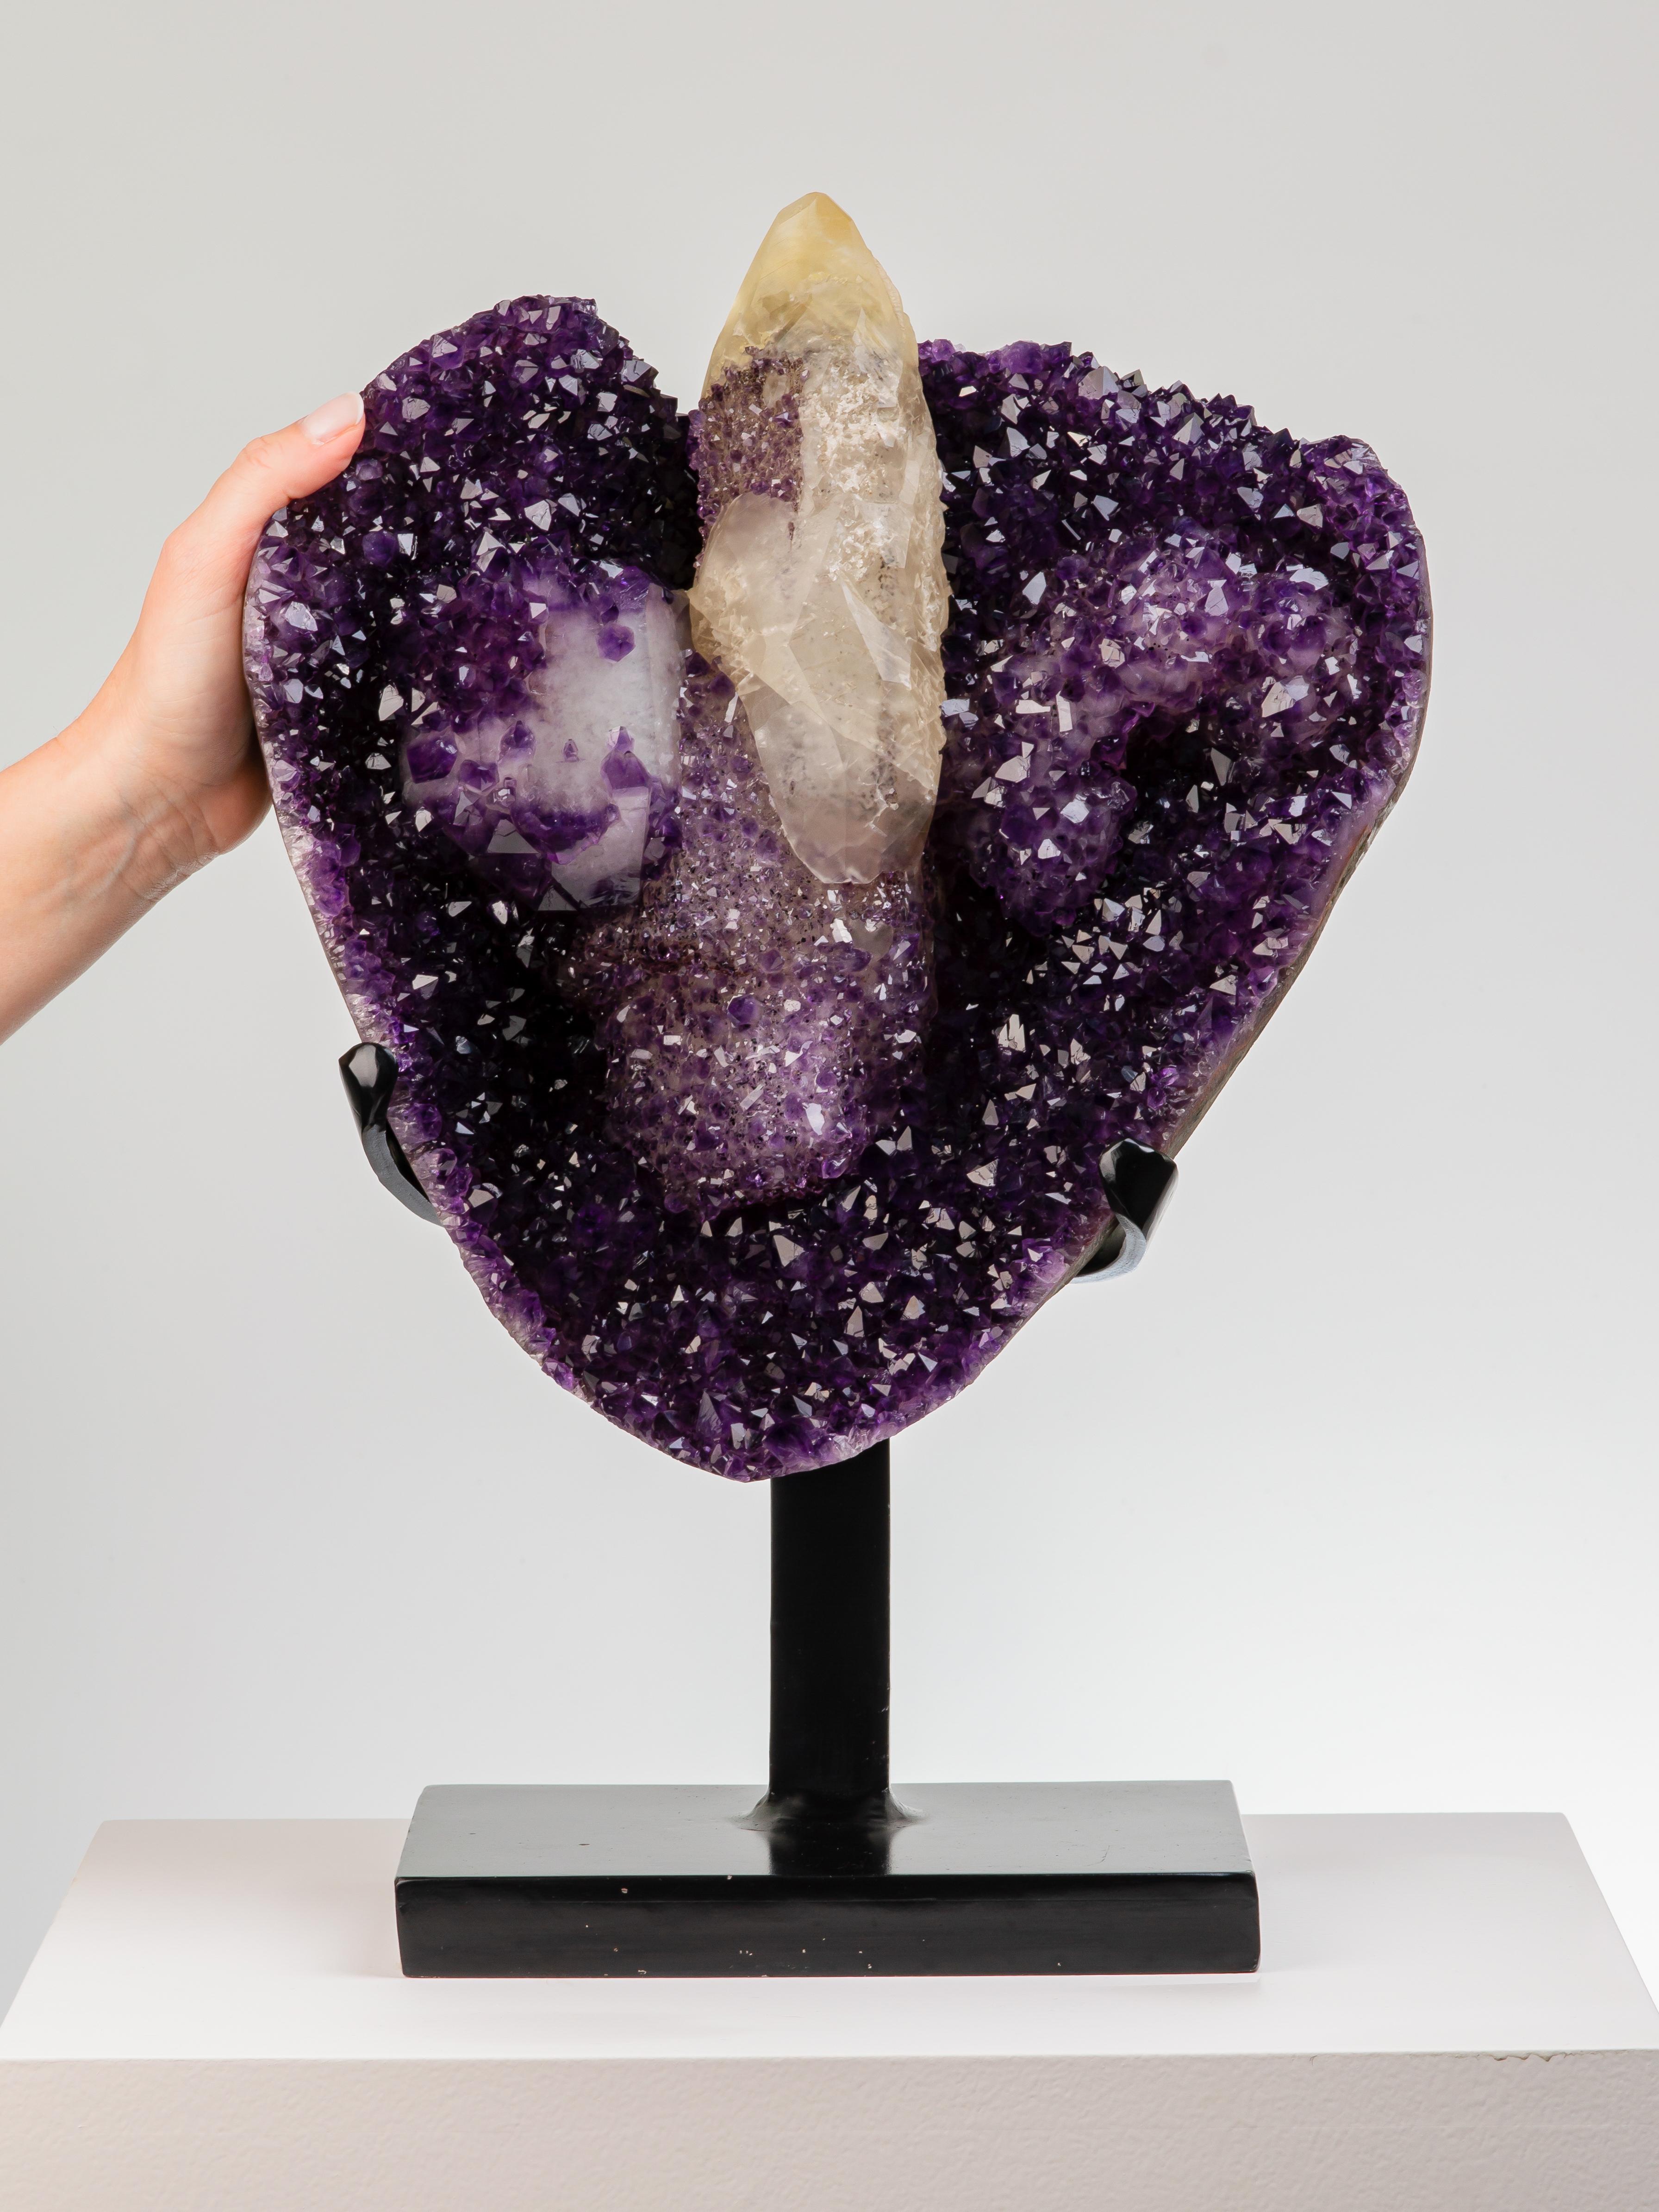 A stunning heart-shaped amethyst formation with a central rocket-shaped
calcite covered with a blanket of amethystine quartz and black goethite.
To the left an icy calcite covered in deep amethyst crystals.

This piece was legally and ethically